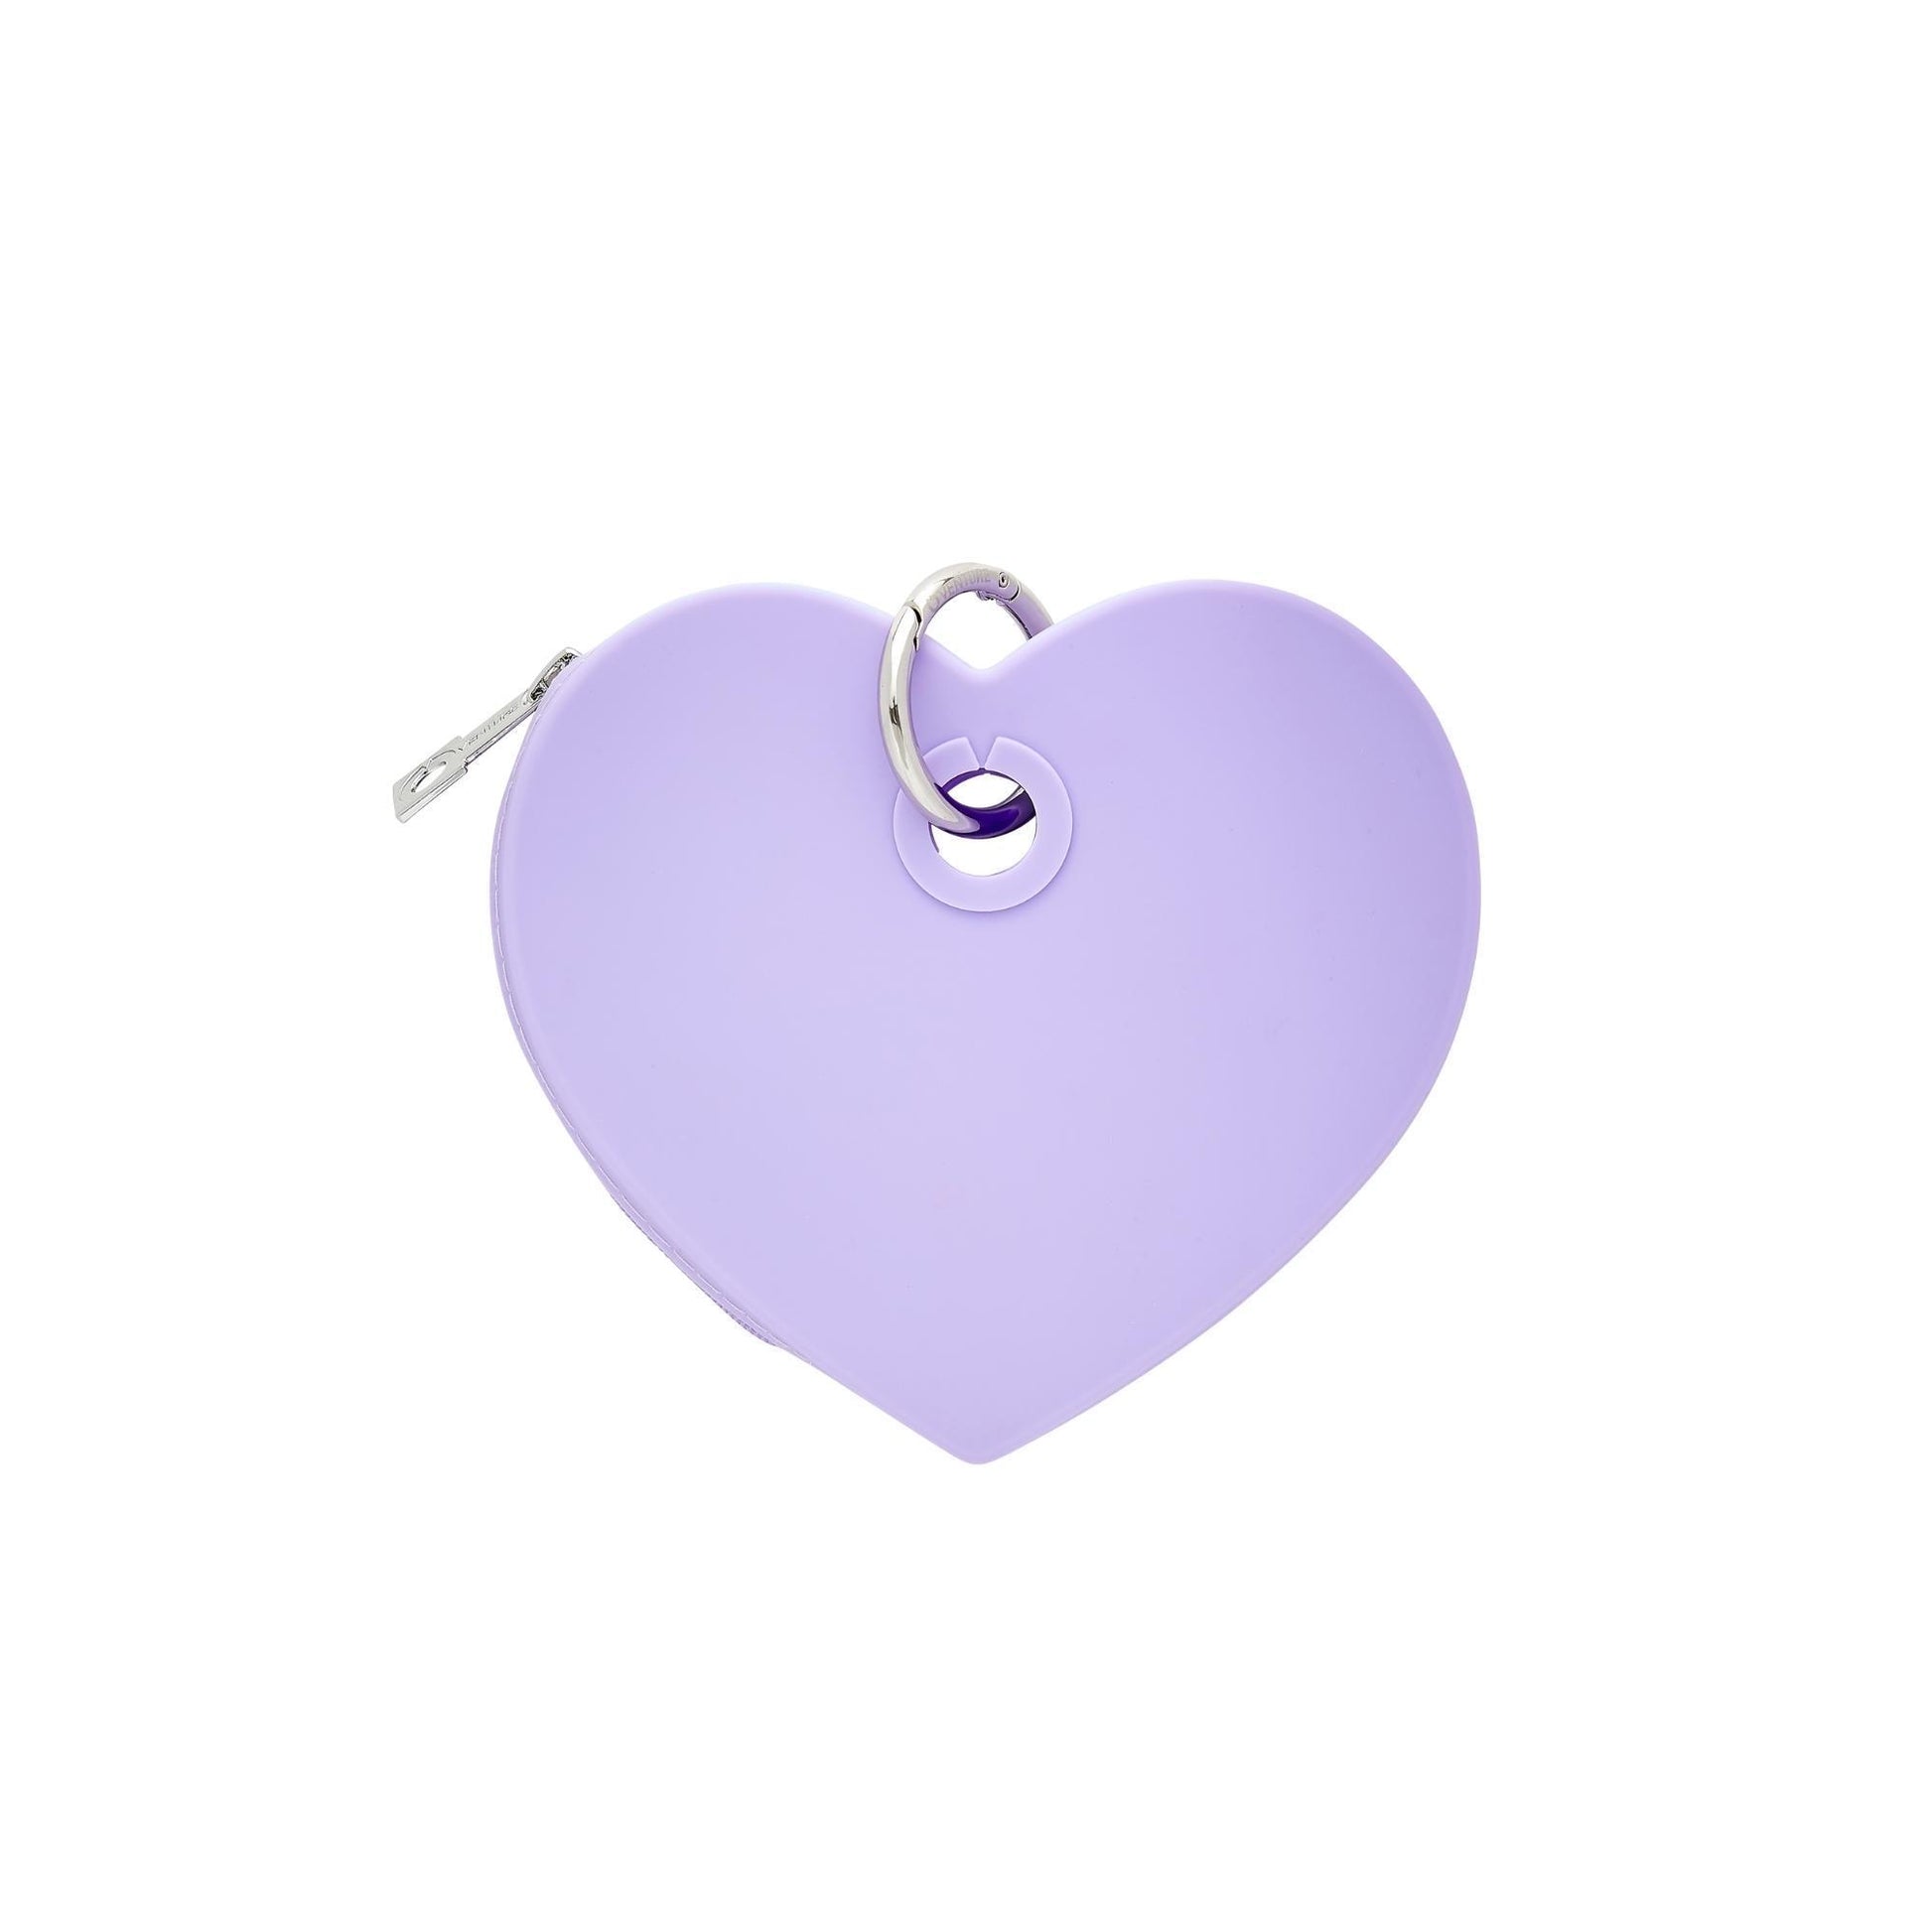 In The Cabana - Silicone Heart Shape Pouch - Oventure